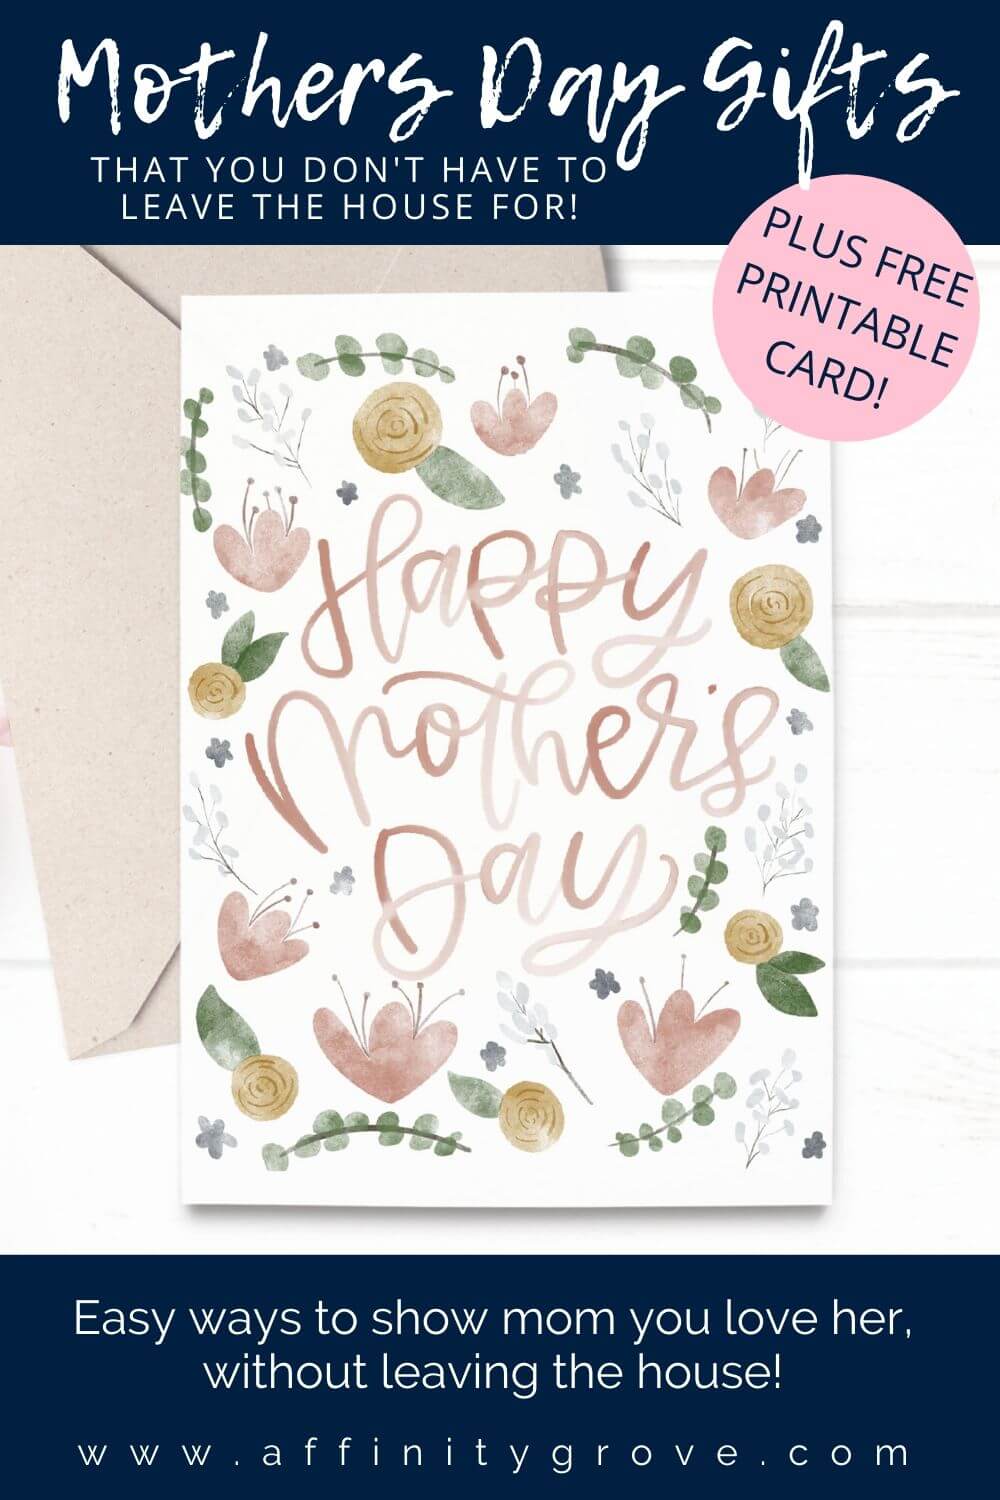 Mothers Day Gifts and Printable Card